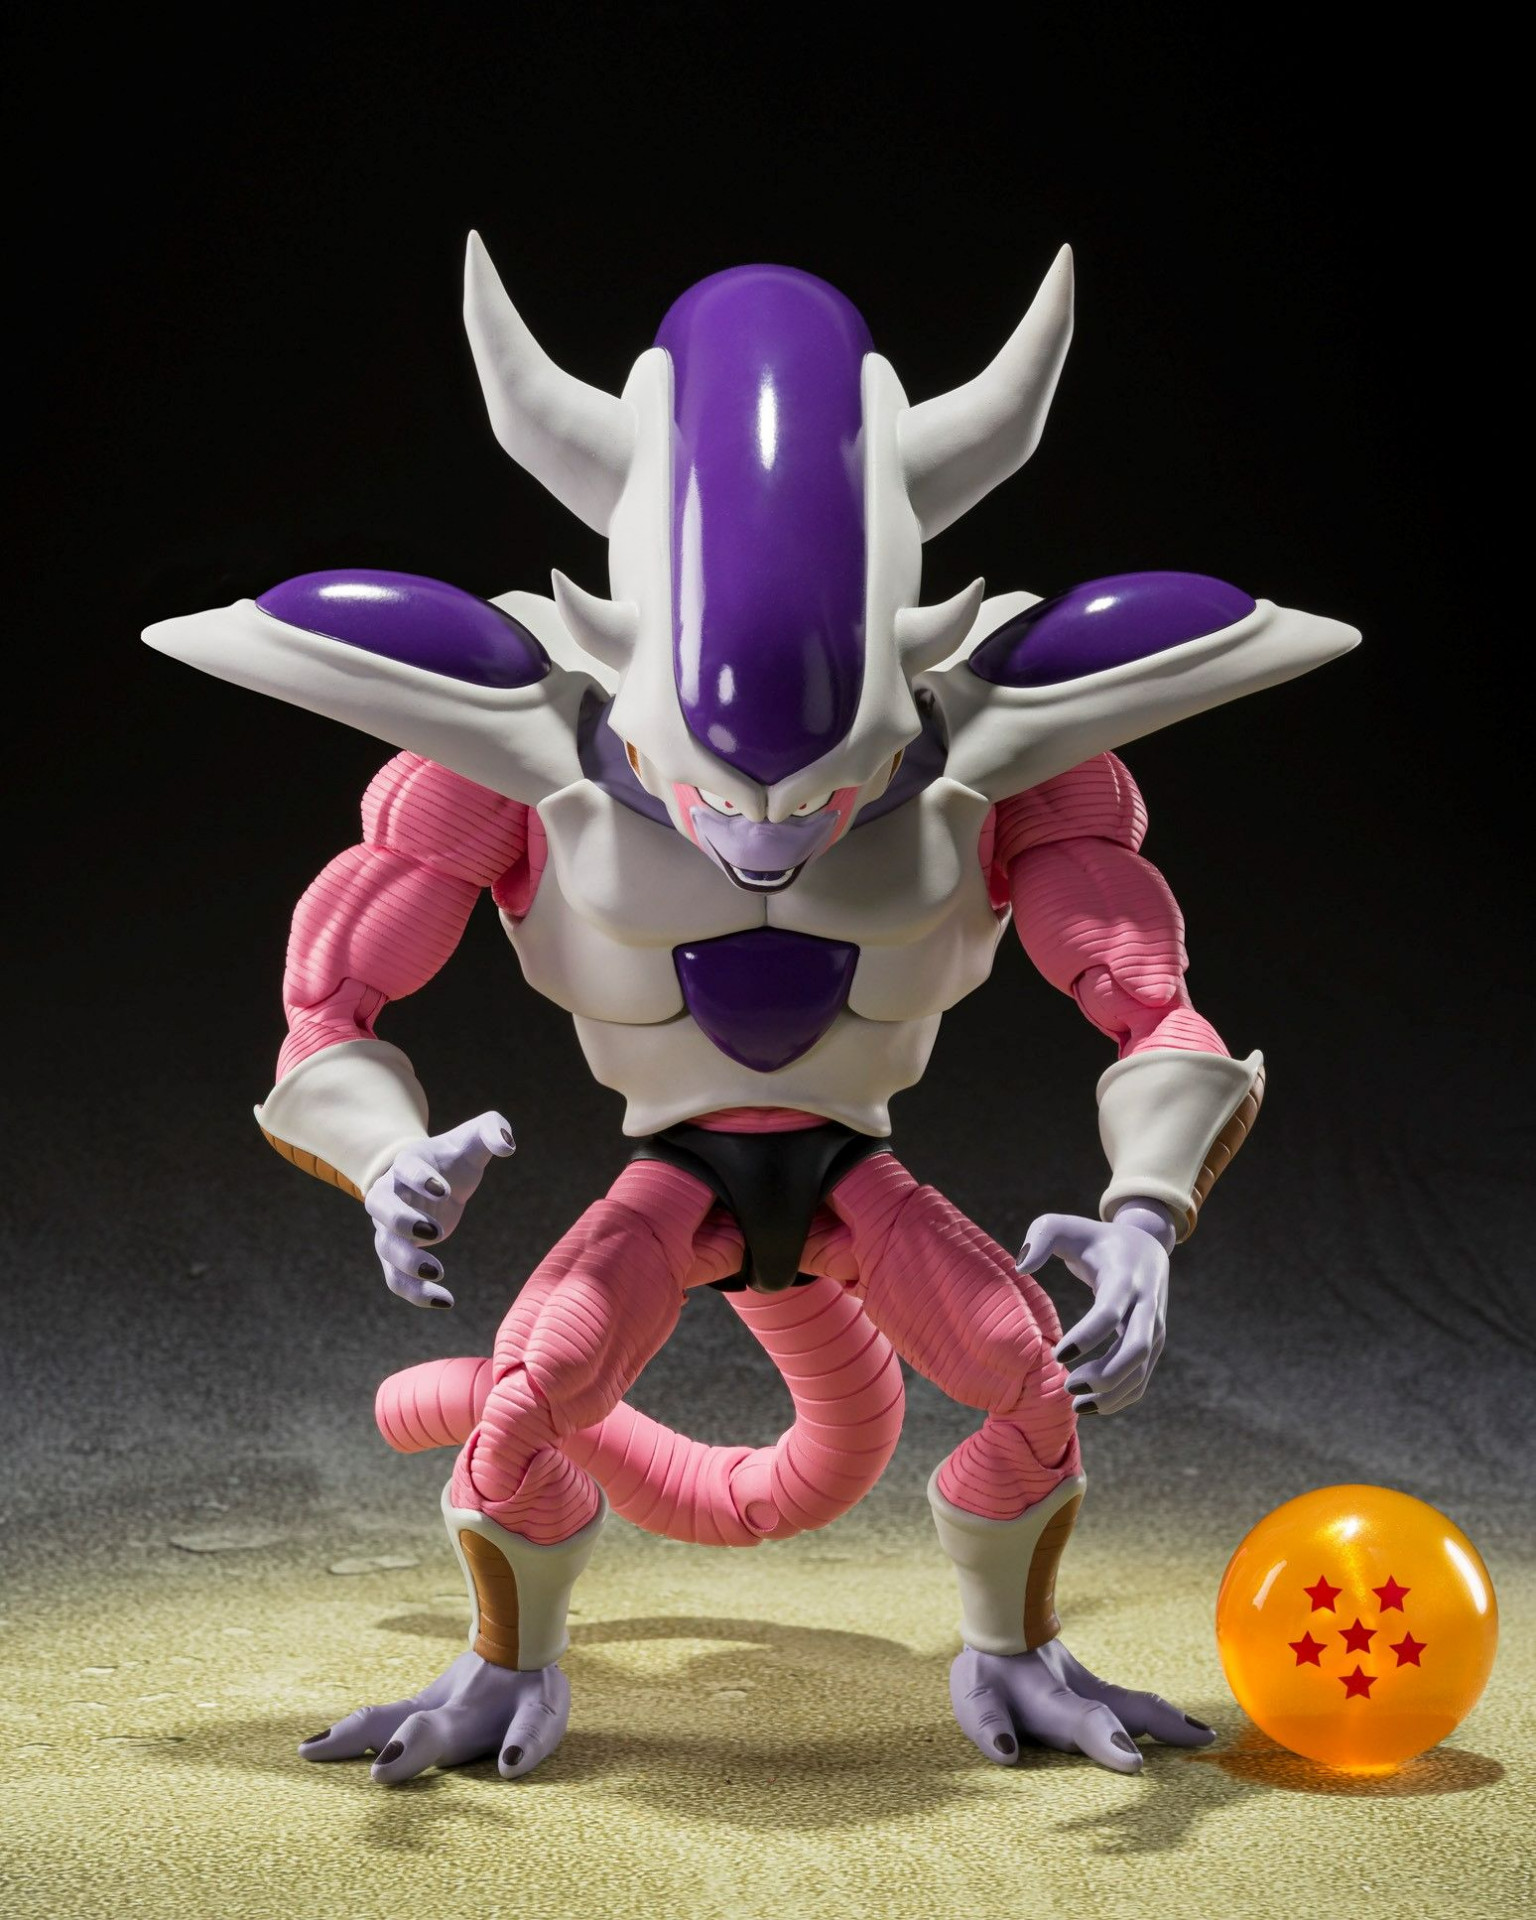 Third Form Frieza Is Coming to the S.H. Figuarts Series!